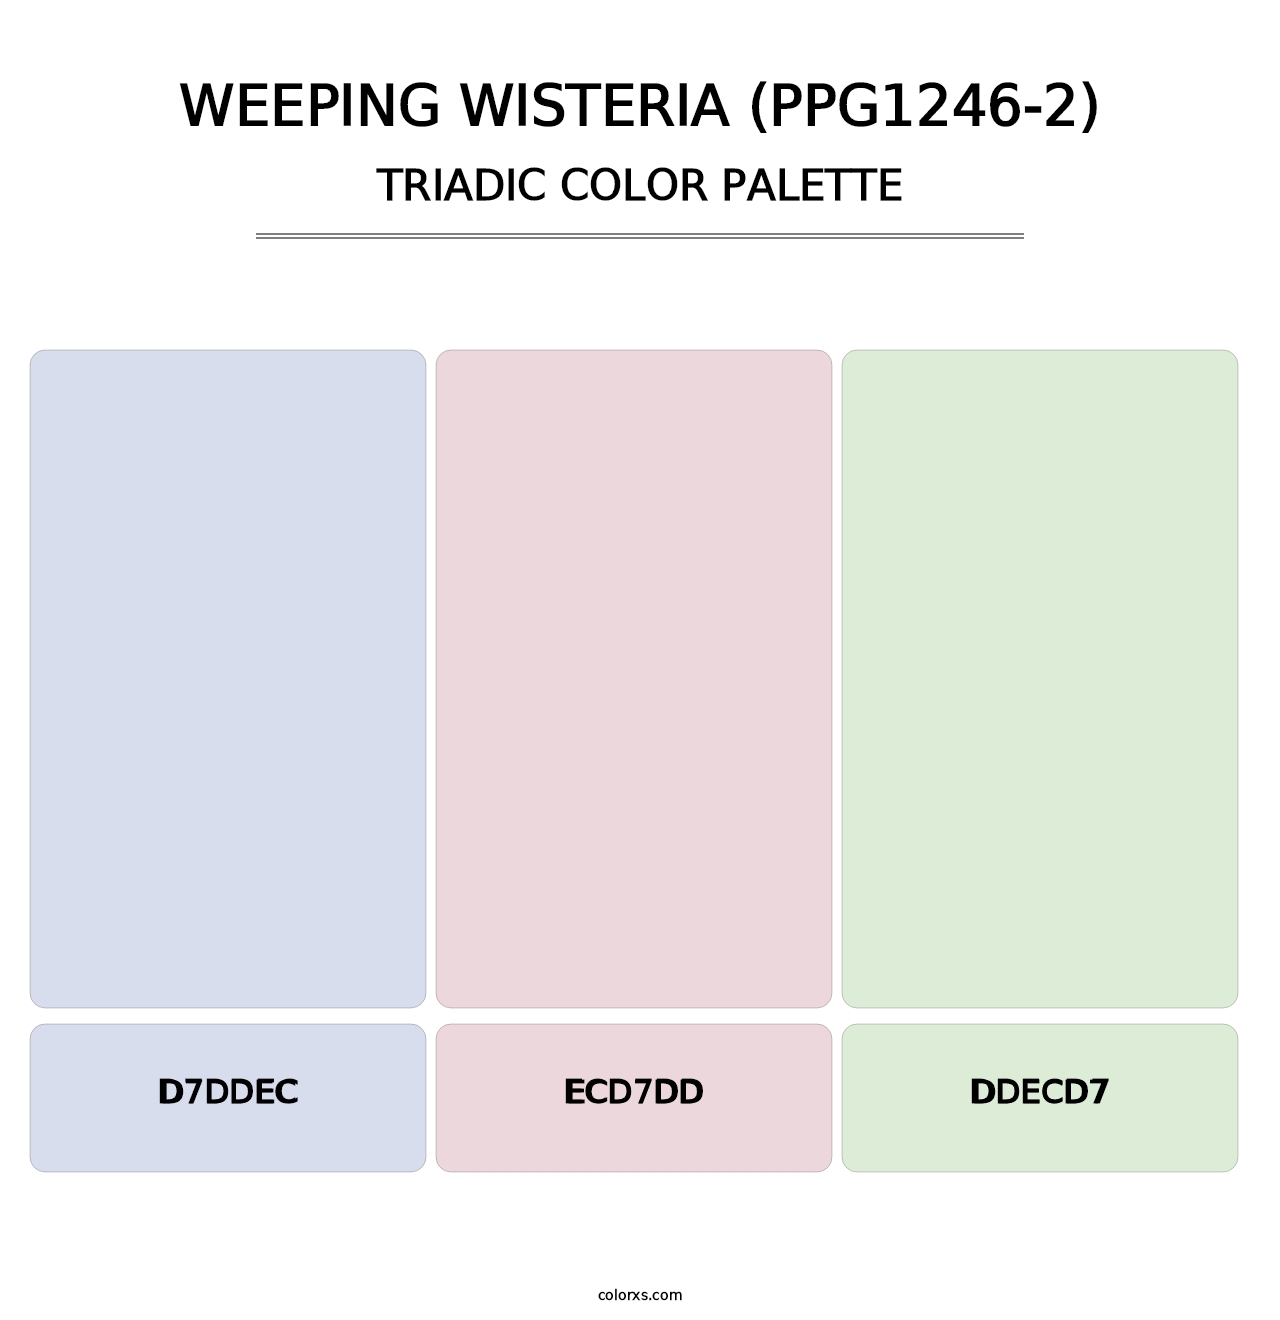 Weeping Wisteria (PPG1246-2) - Triadic Color Palette